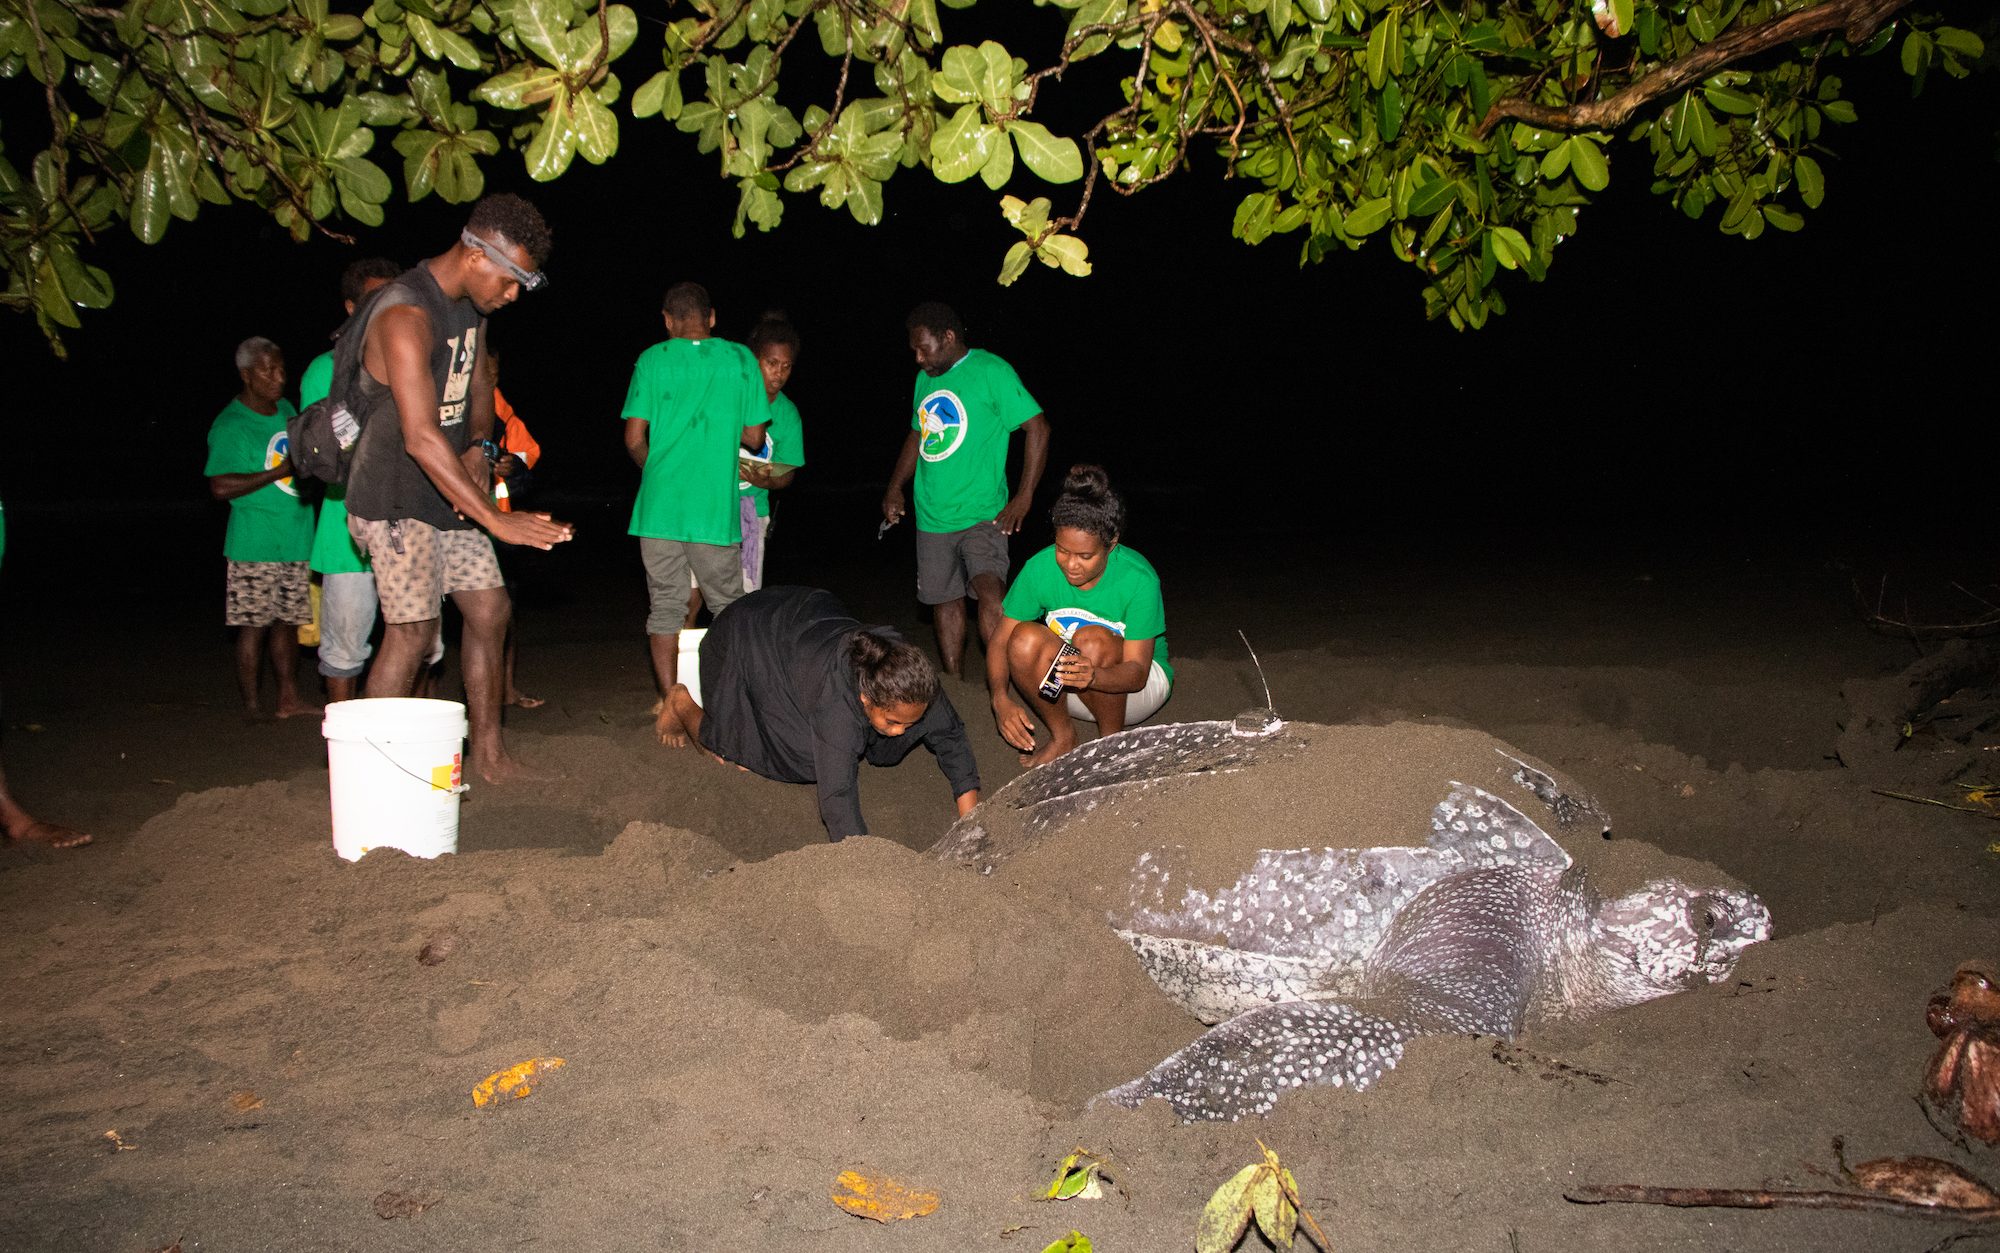 men and women standing behind a leatherback turtle on the beach